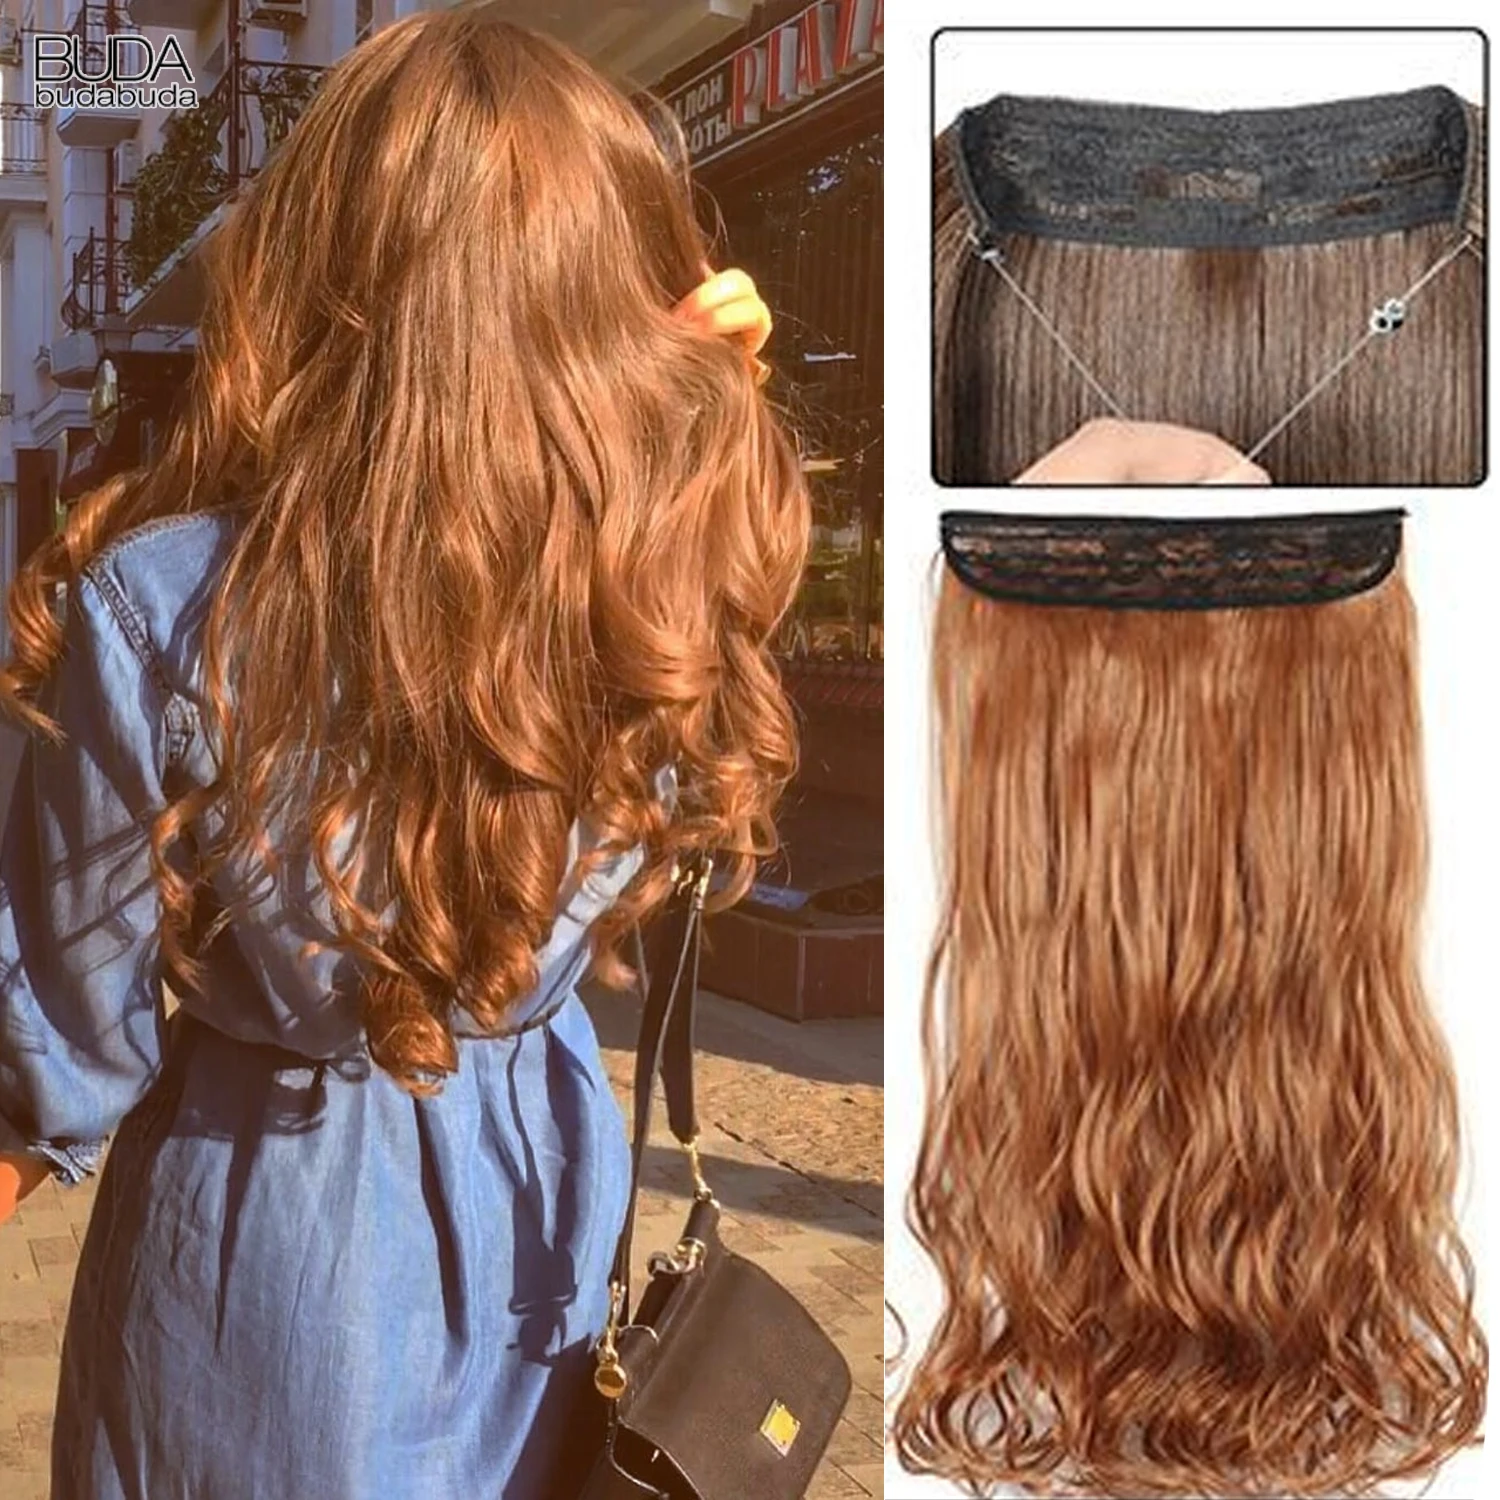 

Synthetic Hairpiece No Clip Long Wavy Natural Hair Fish Line Wig 22Inch Invisible Curly Hair Extension Hairpiece for Women Girls